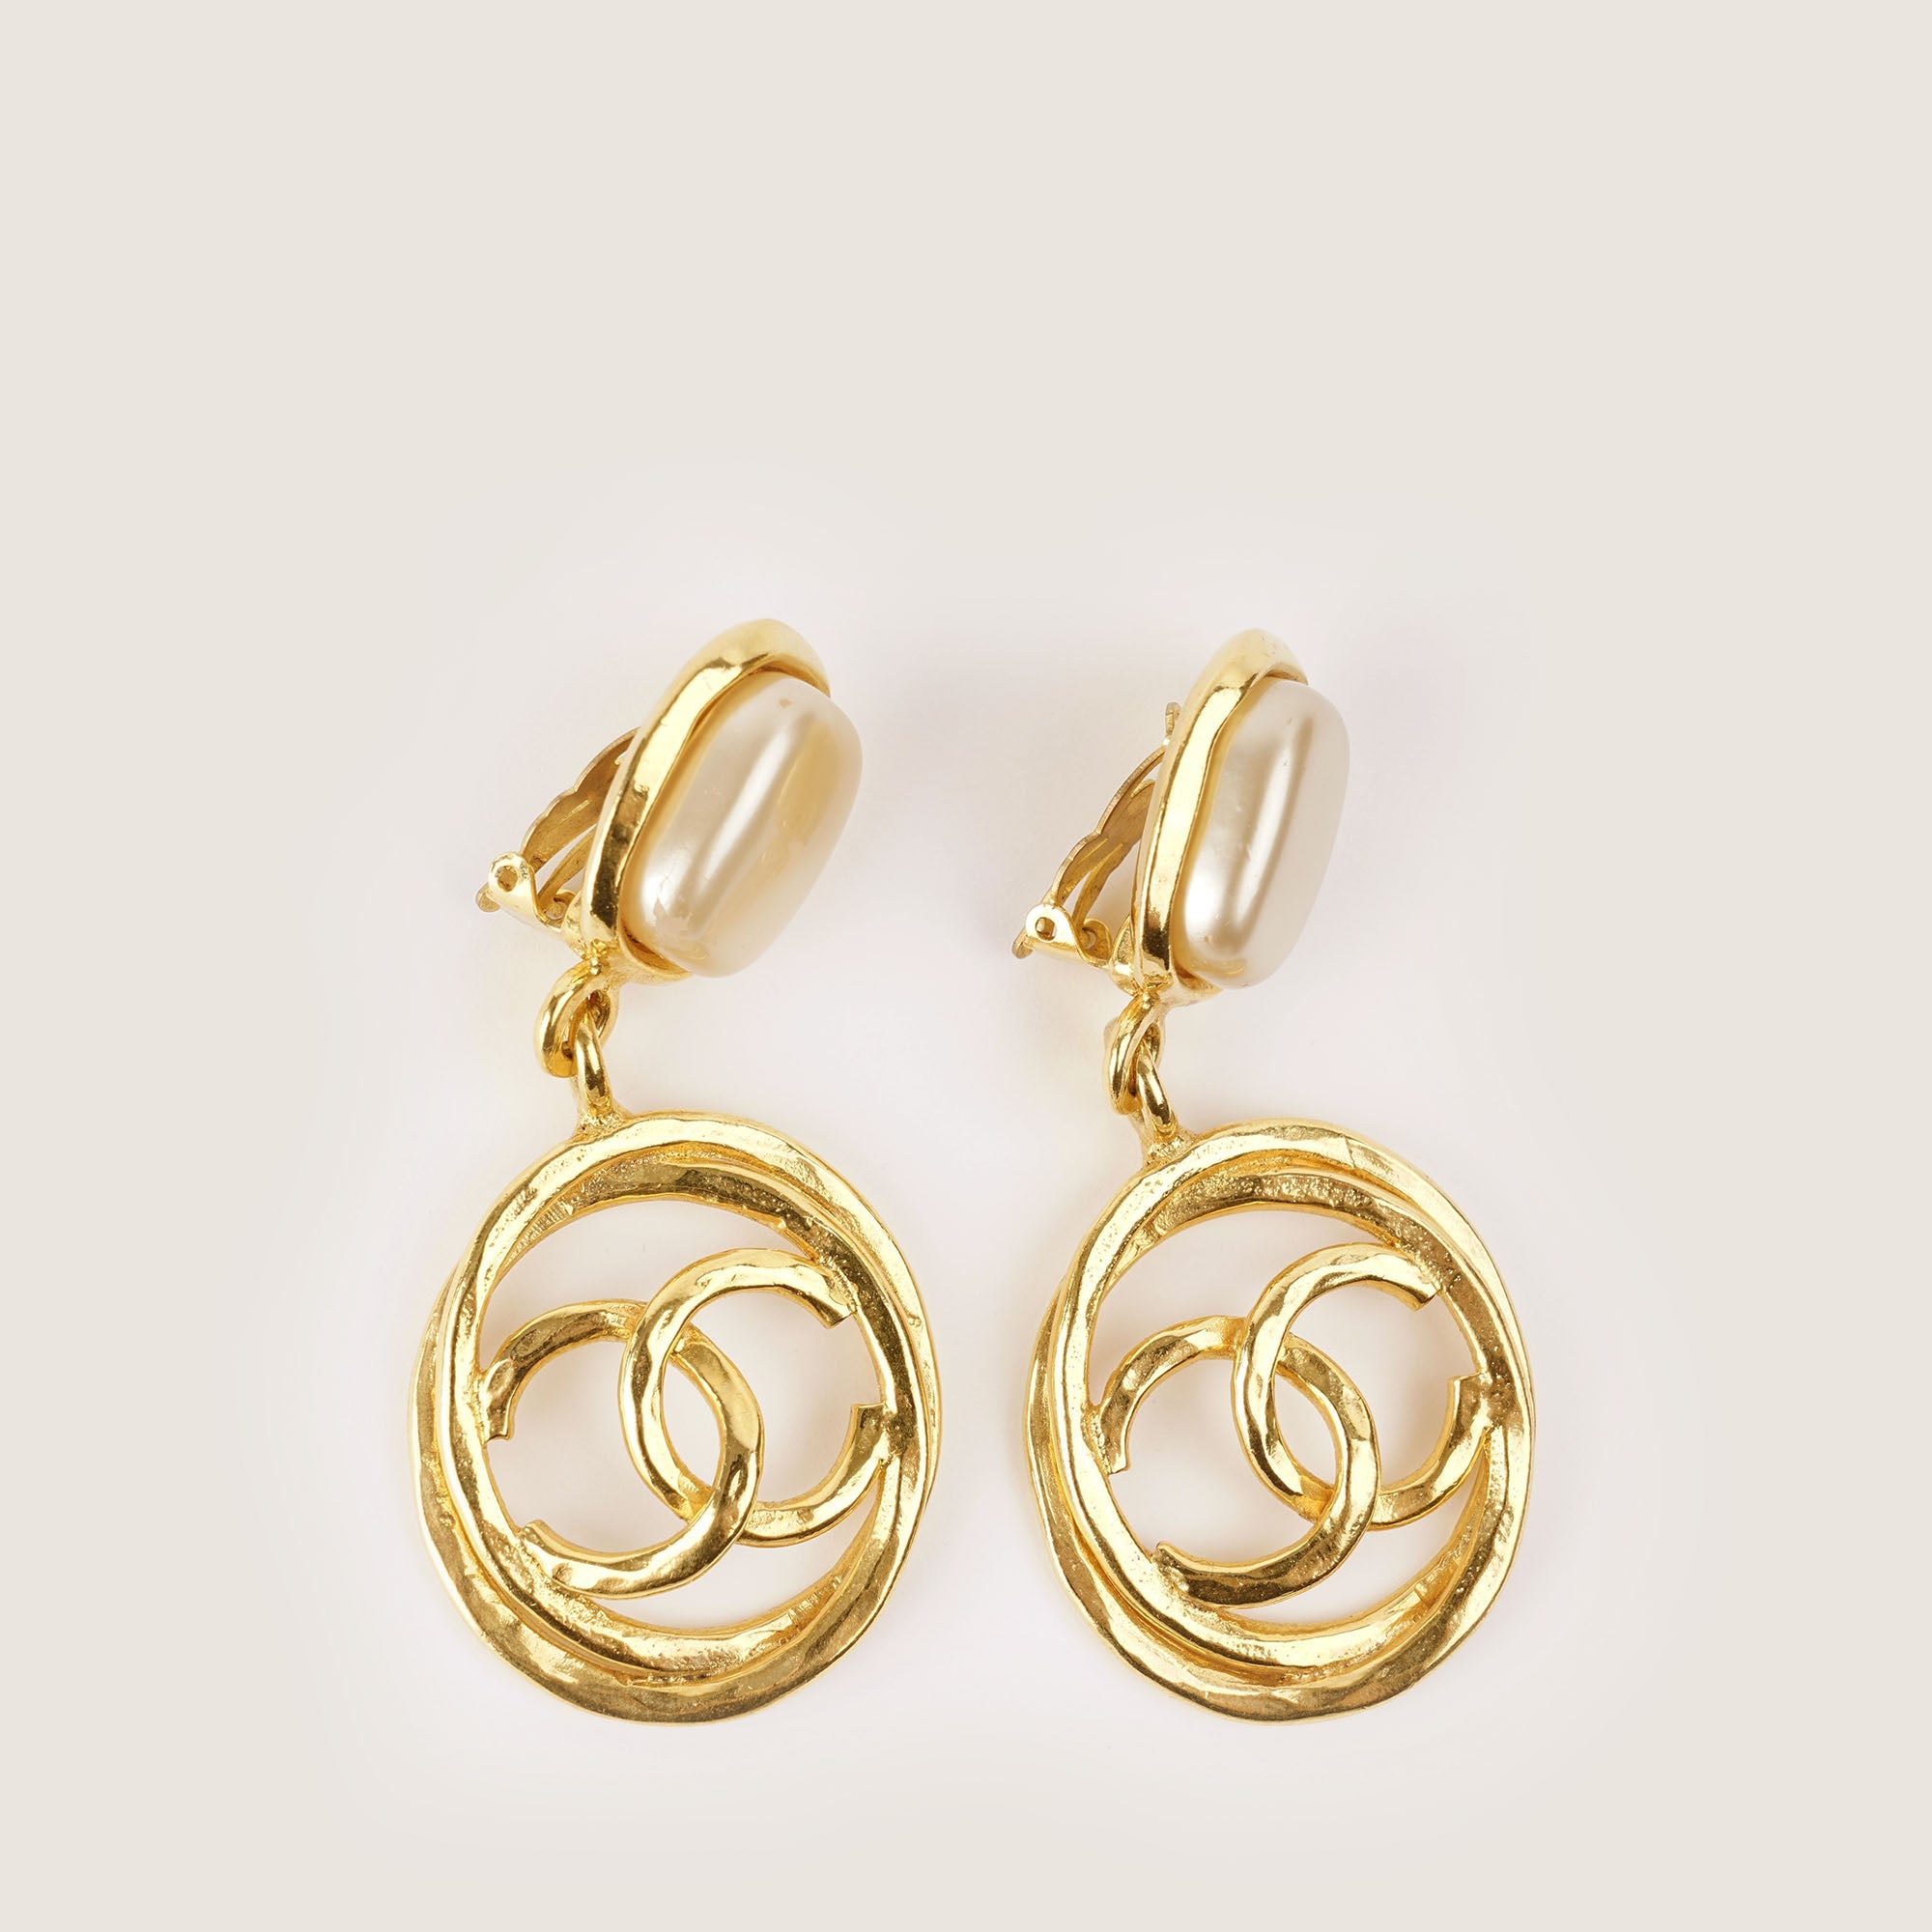 Vintage Oversized CC Earrings - CHANEL - Affordable Luxury